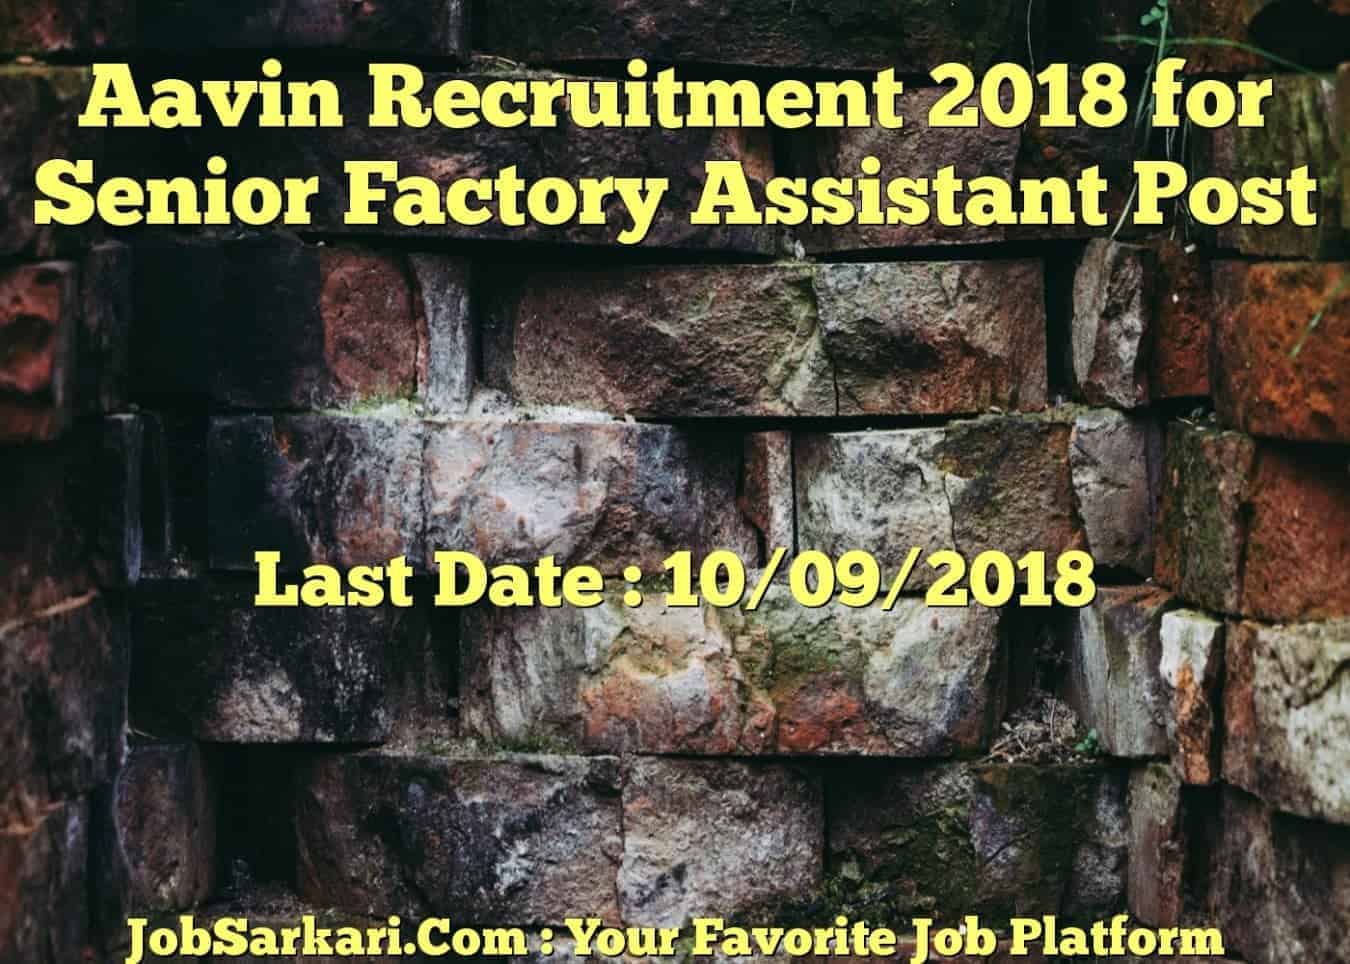 Aavin Recruitment 2018 for Senior Factory Assistant Post